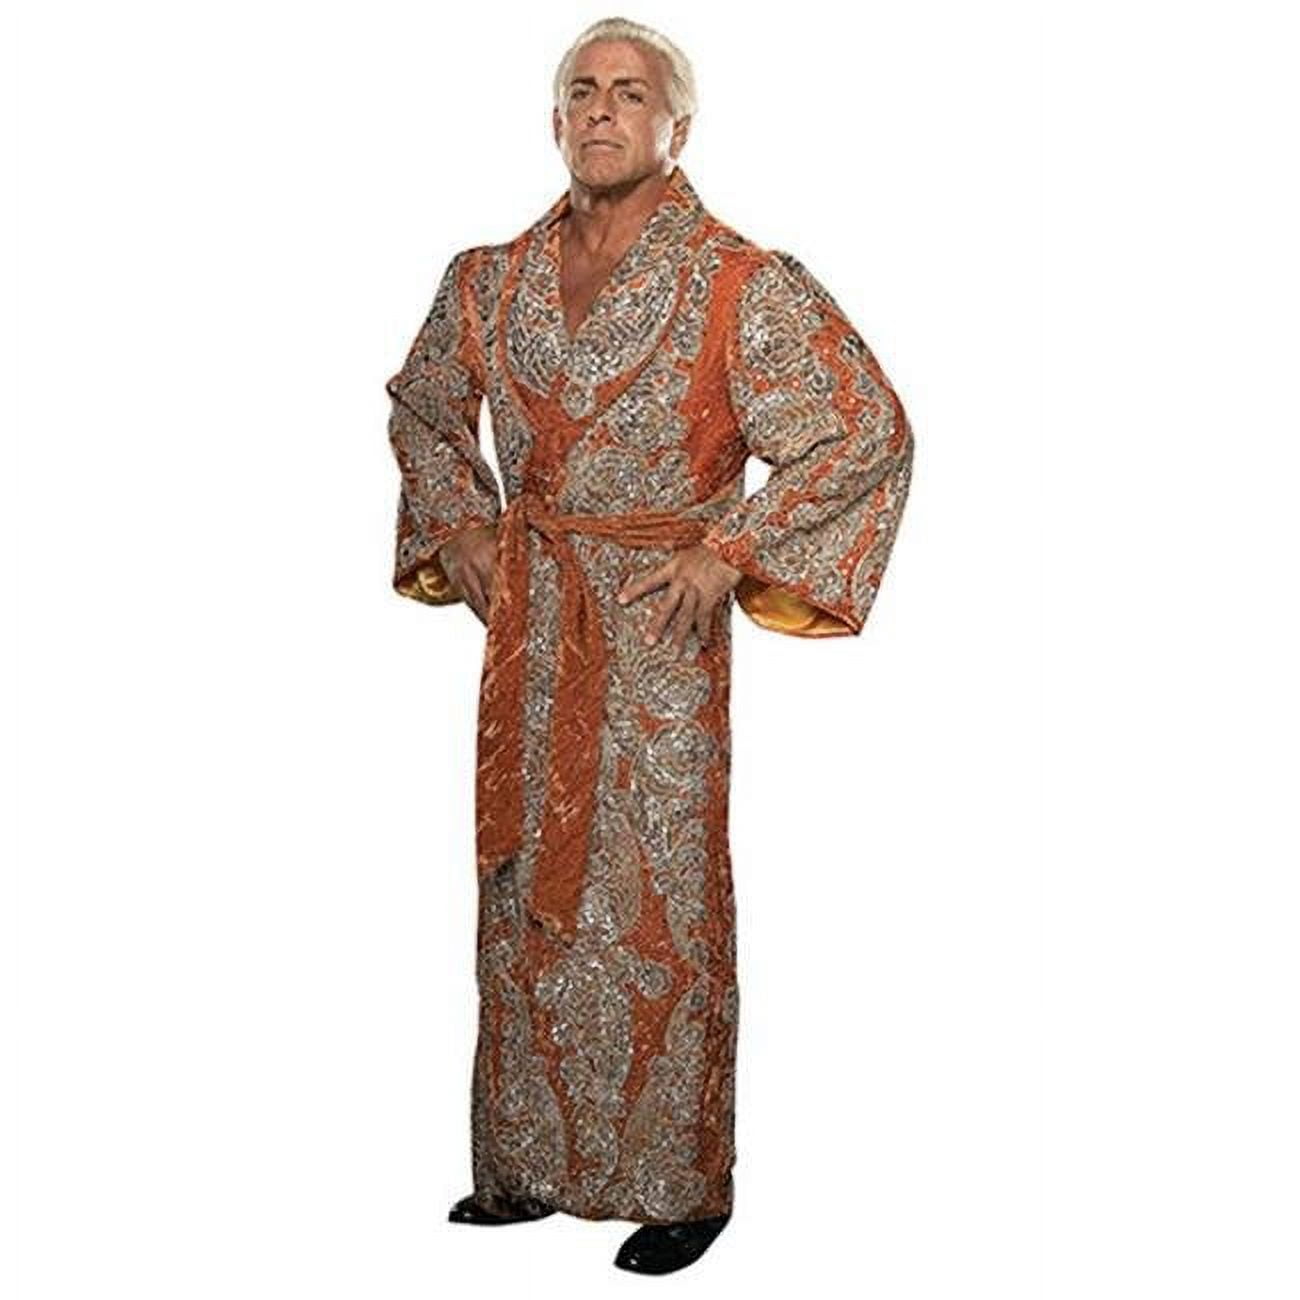 2643 73 X 30 In. Ric Flair - Wwe Wall Decal